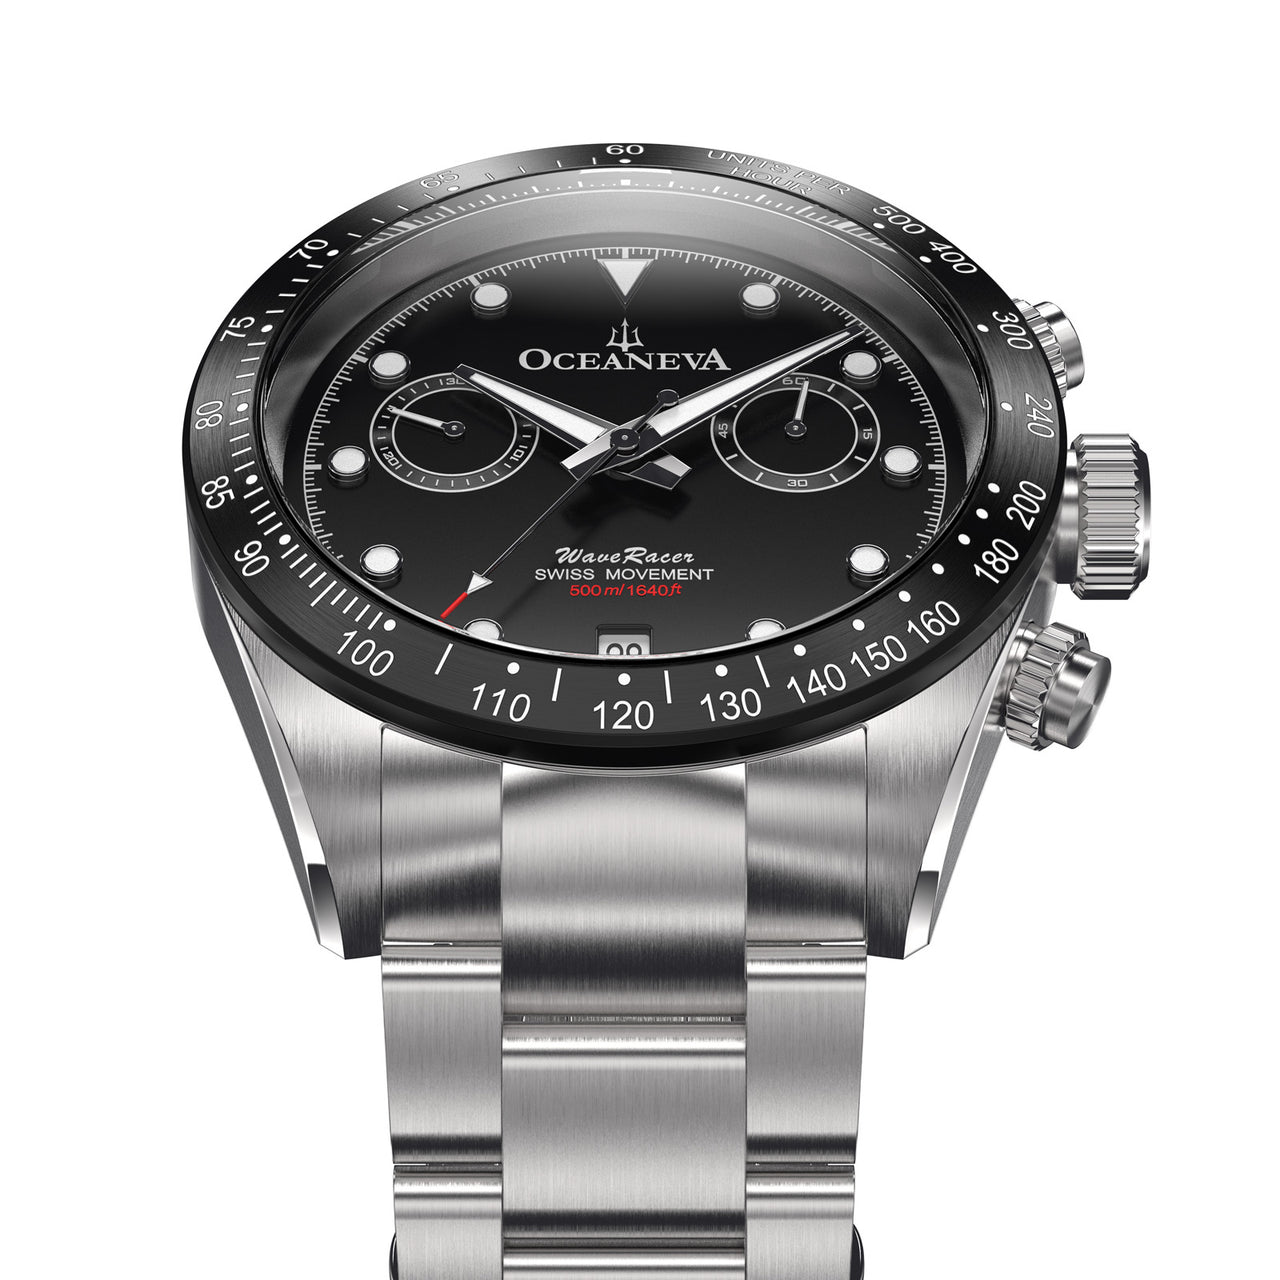 Oceaneva Black Dial Chronograph Watch Frontal View Picture